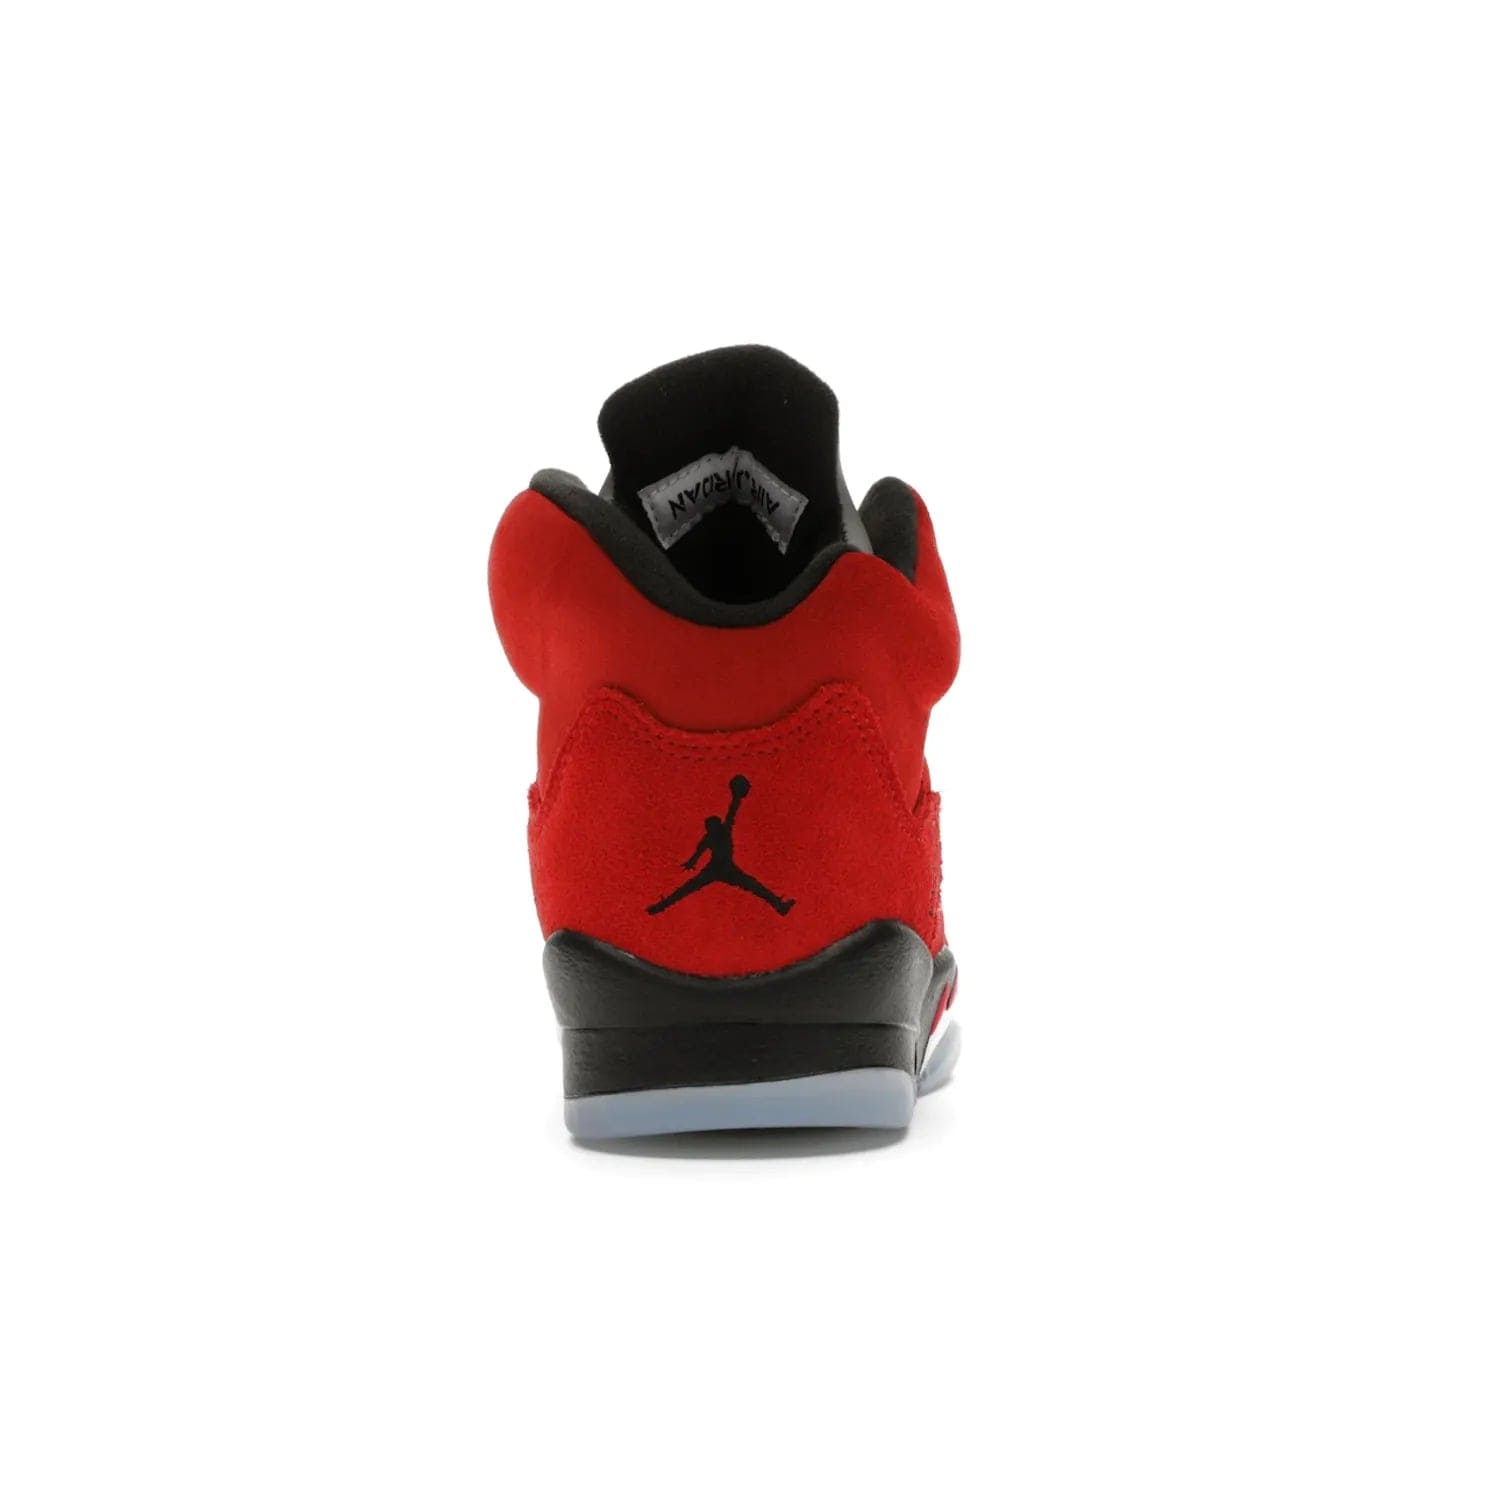 Jordan 5 Retro Raging Bull Red (2021) (GS) - Image 28 - Only at www.BallersClubKickz.com - Jordan 5 Retro Raging Bulls Red 2021 GS. Varsity Red suede upper with embroidered number 23, black leather detail, red laces, and midsole with air cushioning. Jumpman logos on tongue, heel, and outsole. On-trend streetwear and basketball style. Released April 10, 2021.